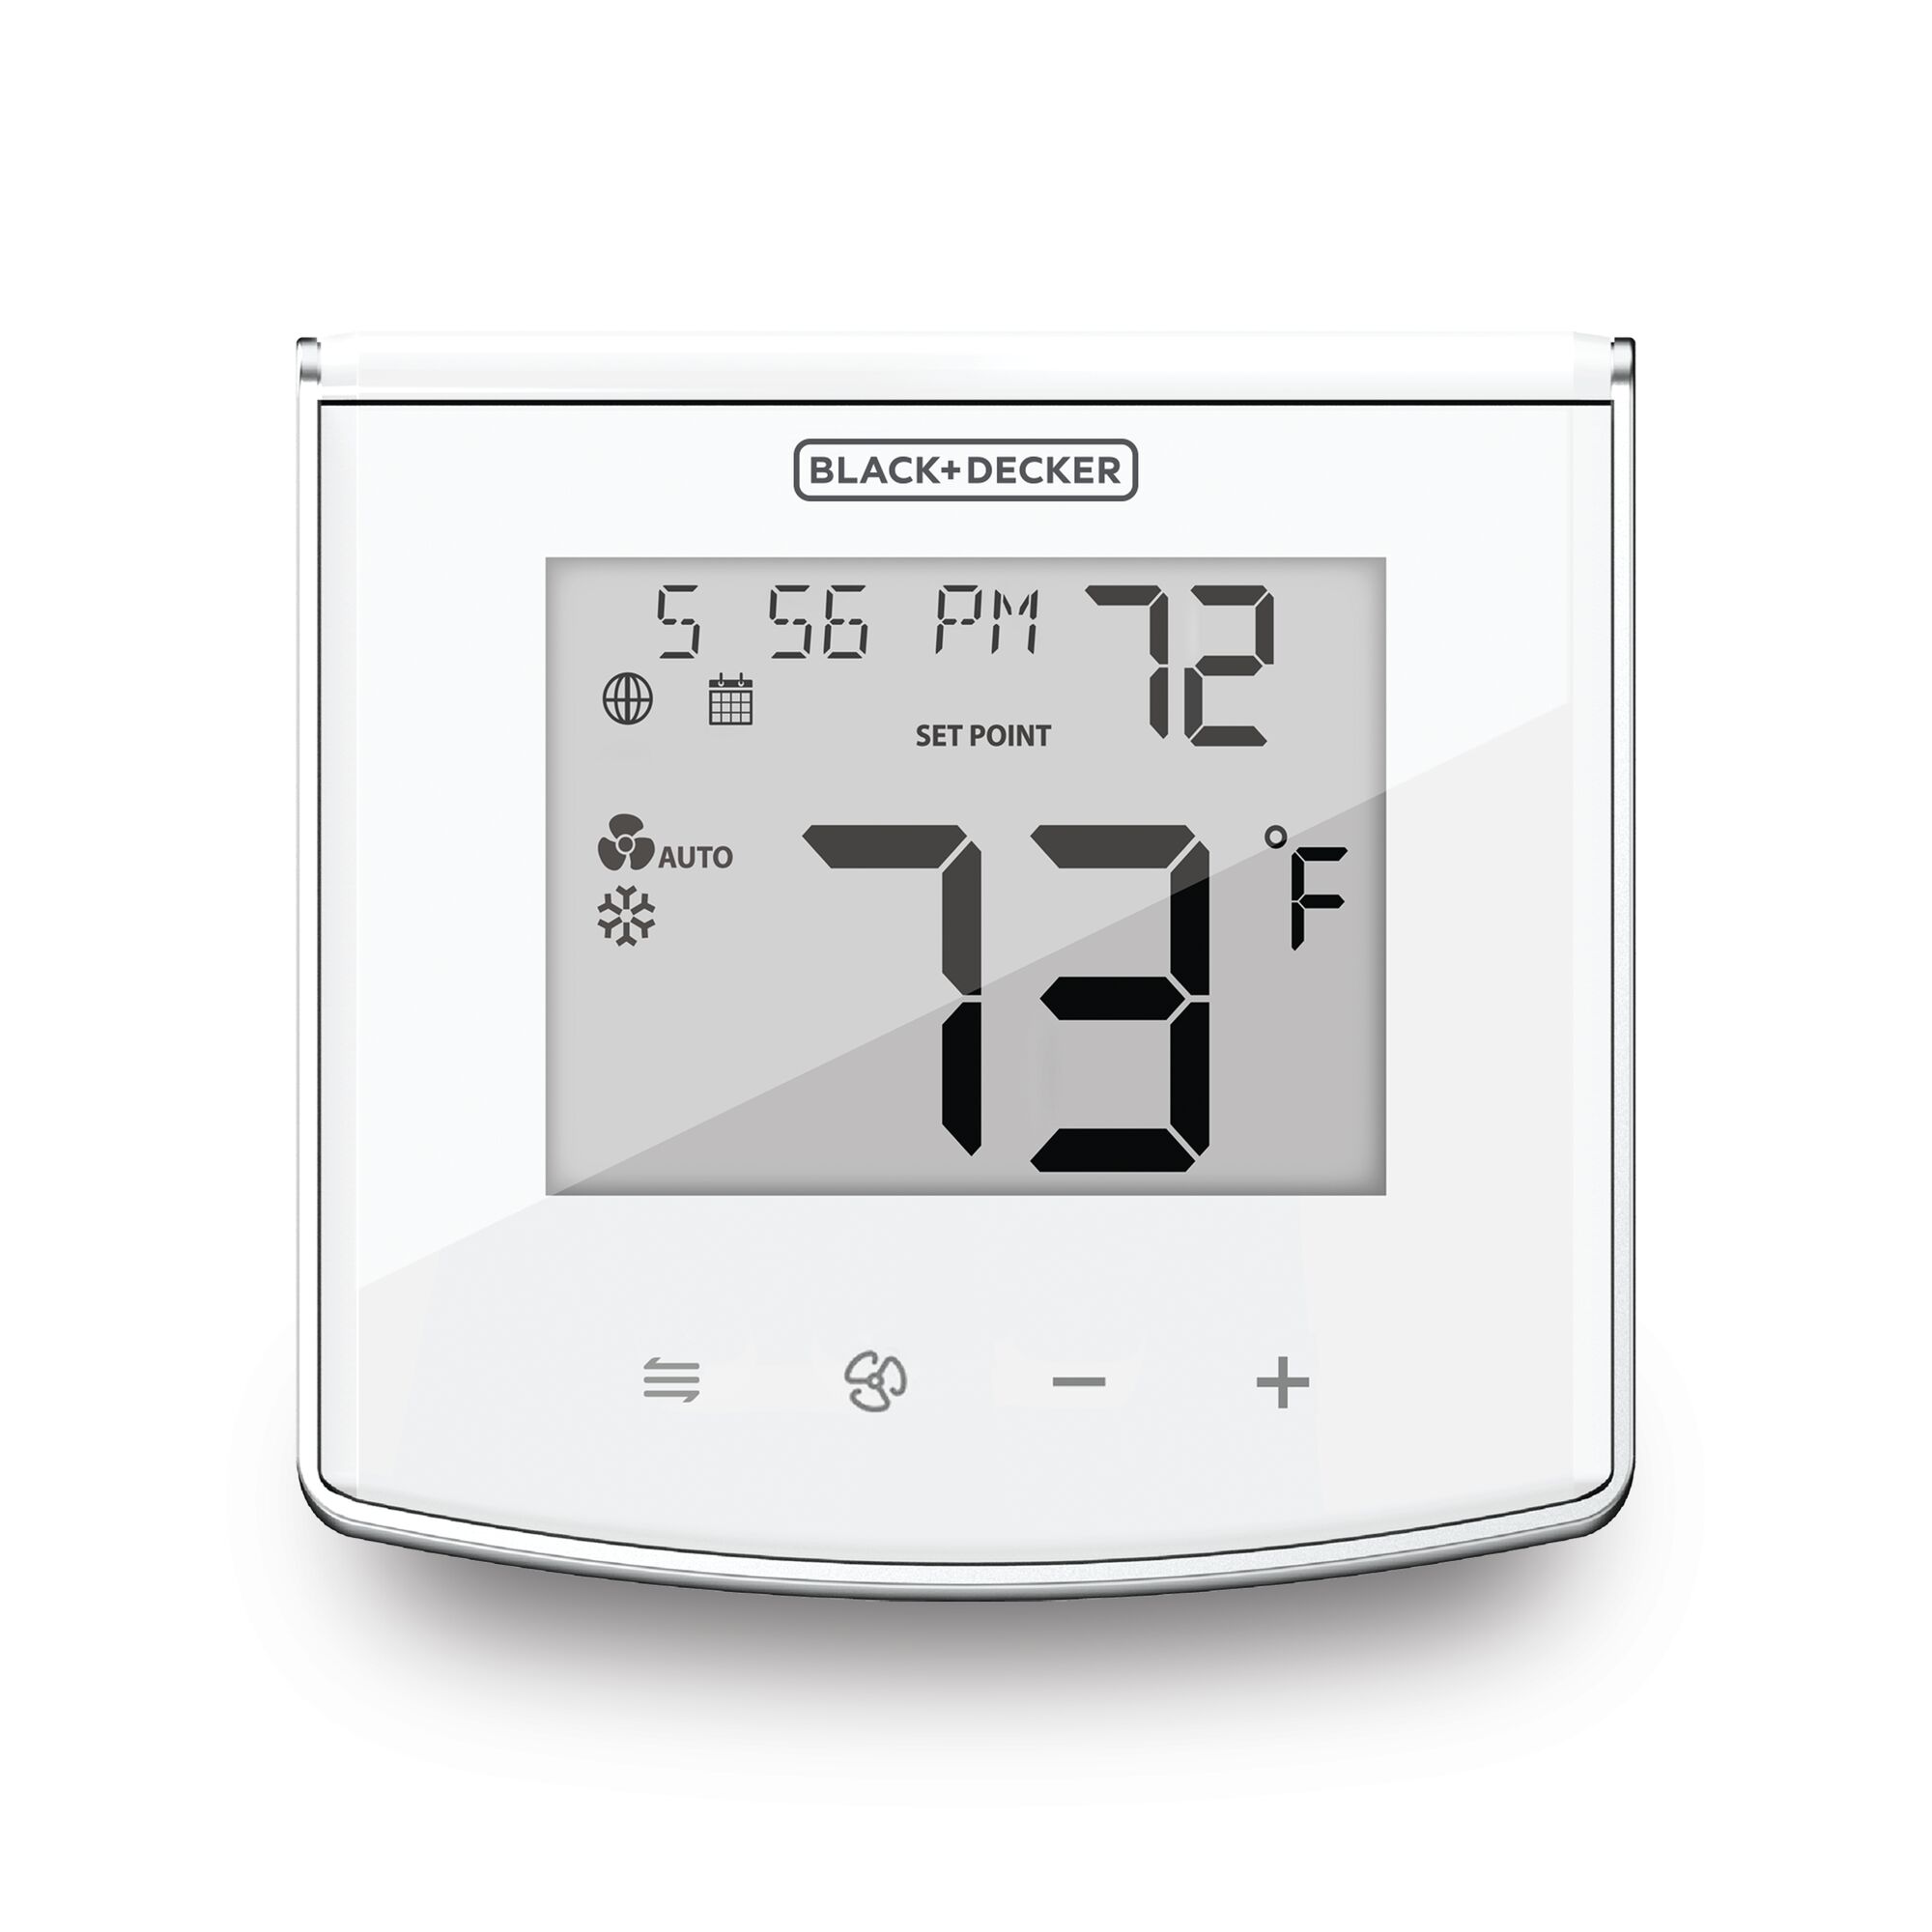 Profile image of BLACK+DECKER digital thermostat showing high visibility temperature call out